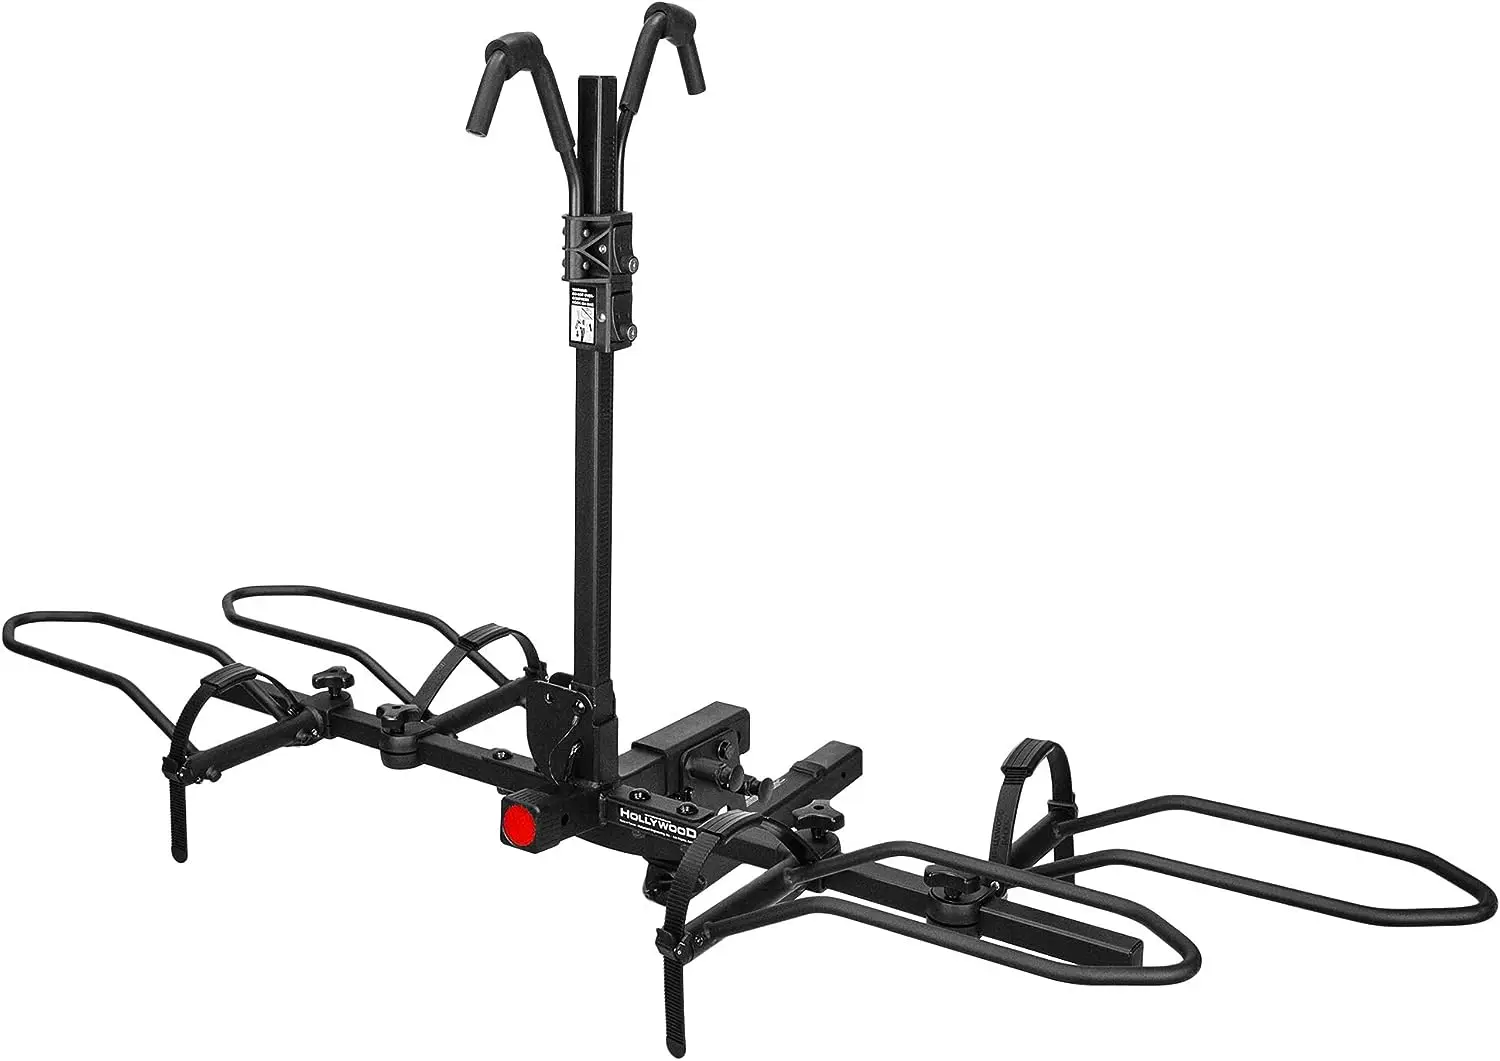 

Sport Rider 2" Hitch Bike , Carries 2 Bikes up to 80 lbs Each for Standard, Fat Tire and Bicycles - Heavy Duty, Foldable Eb